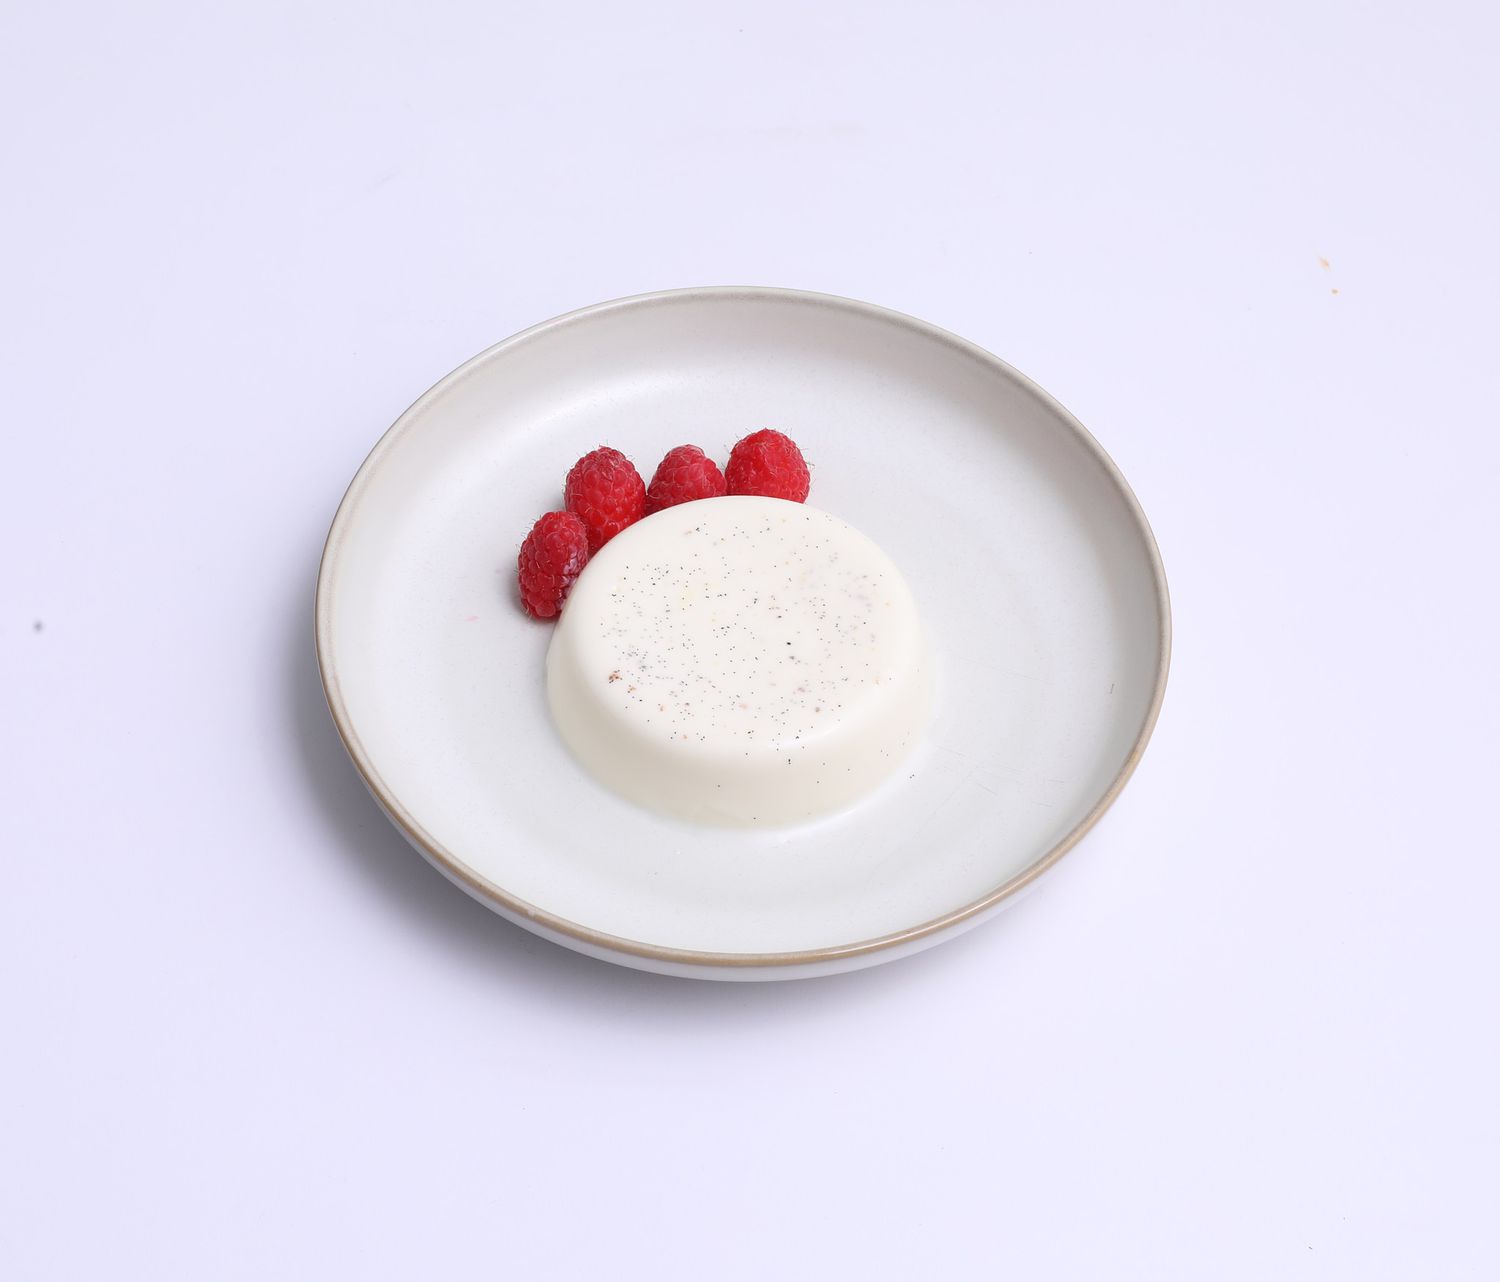 An unmolded vanilla panna cotta on a white plate with four fresh raspberries